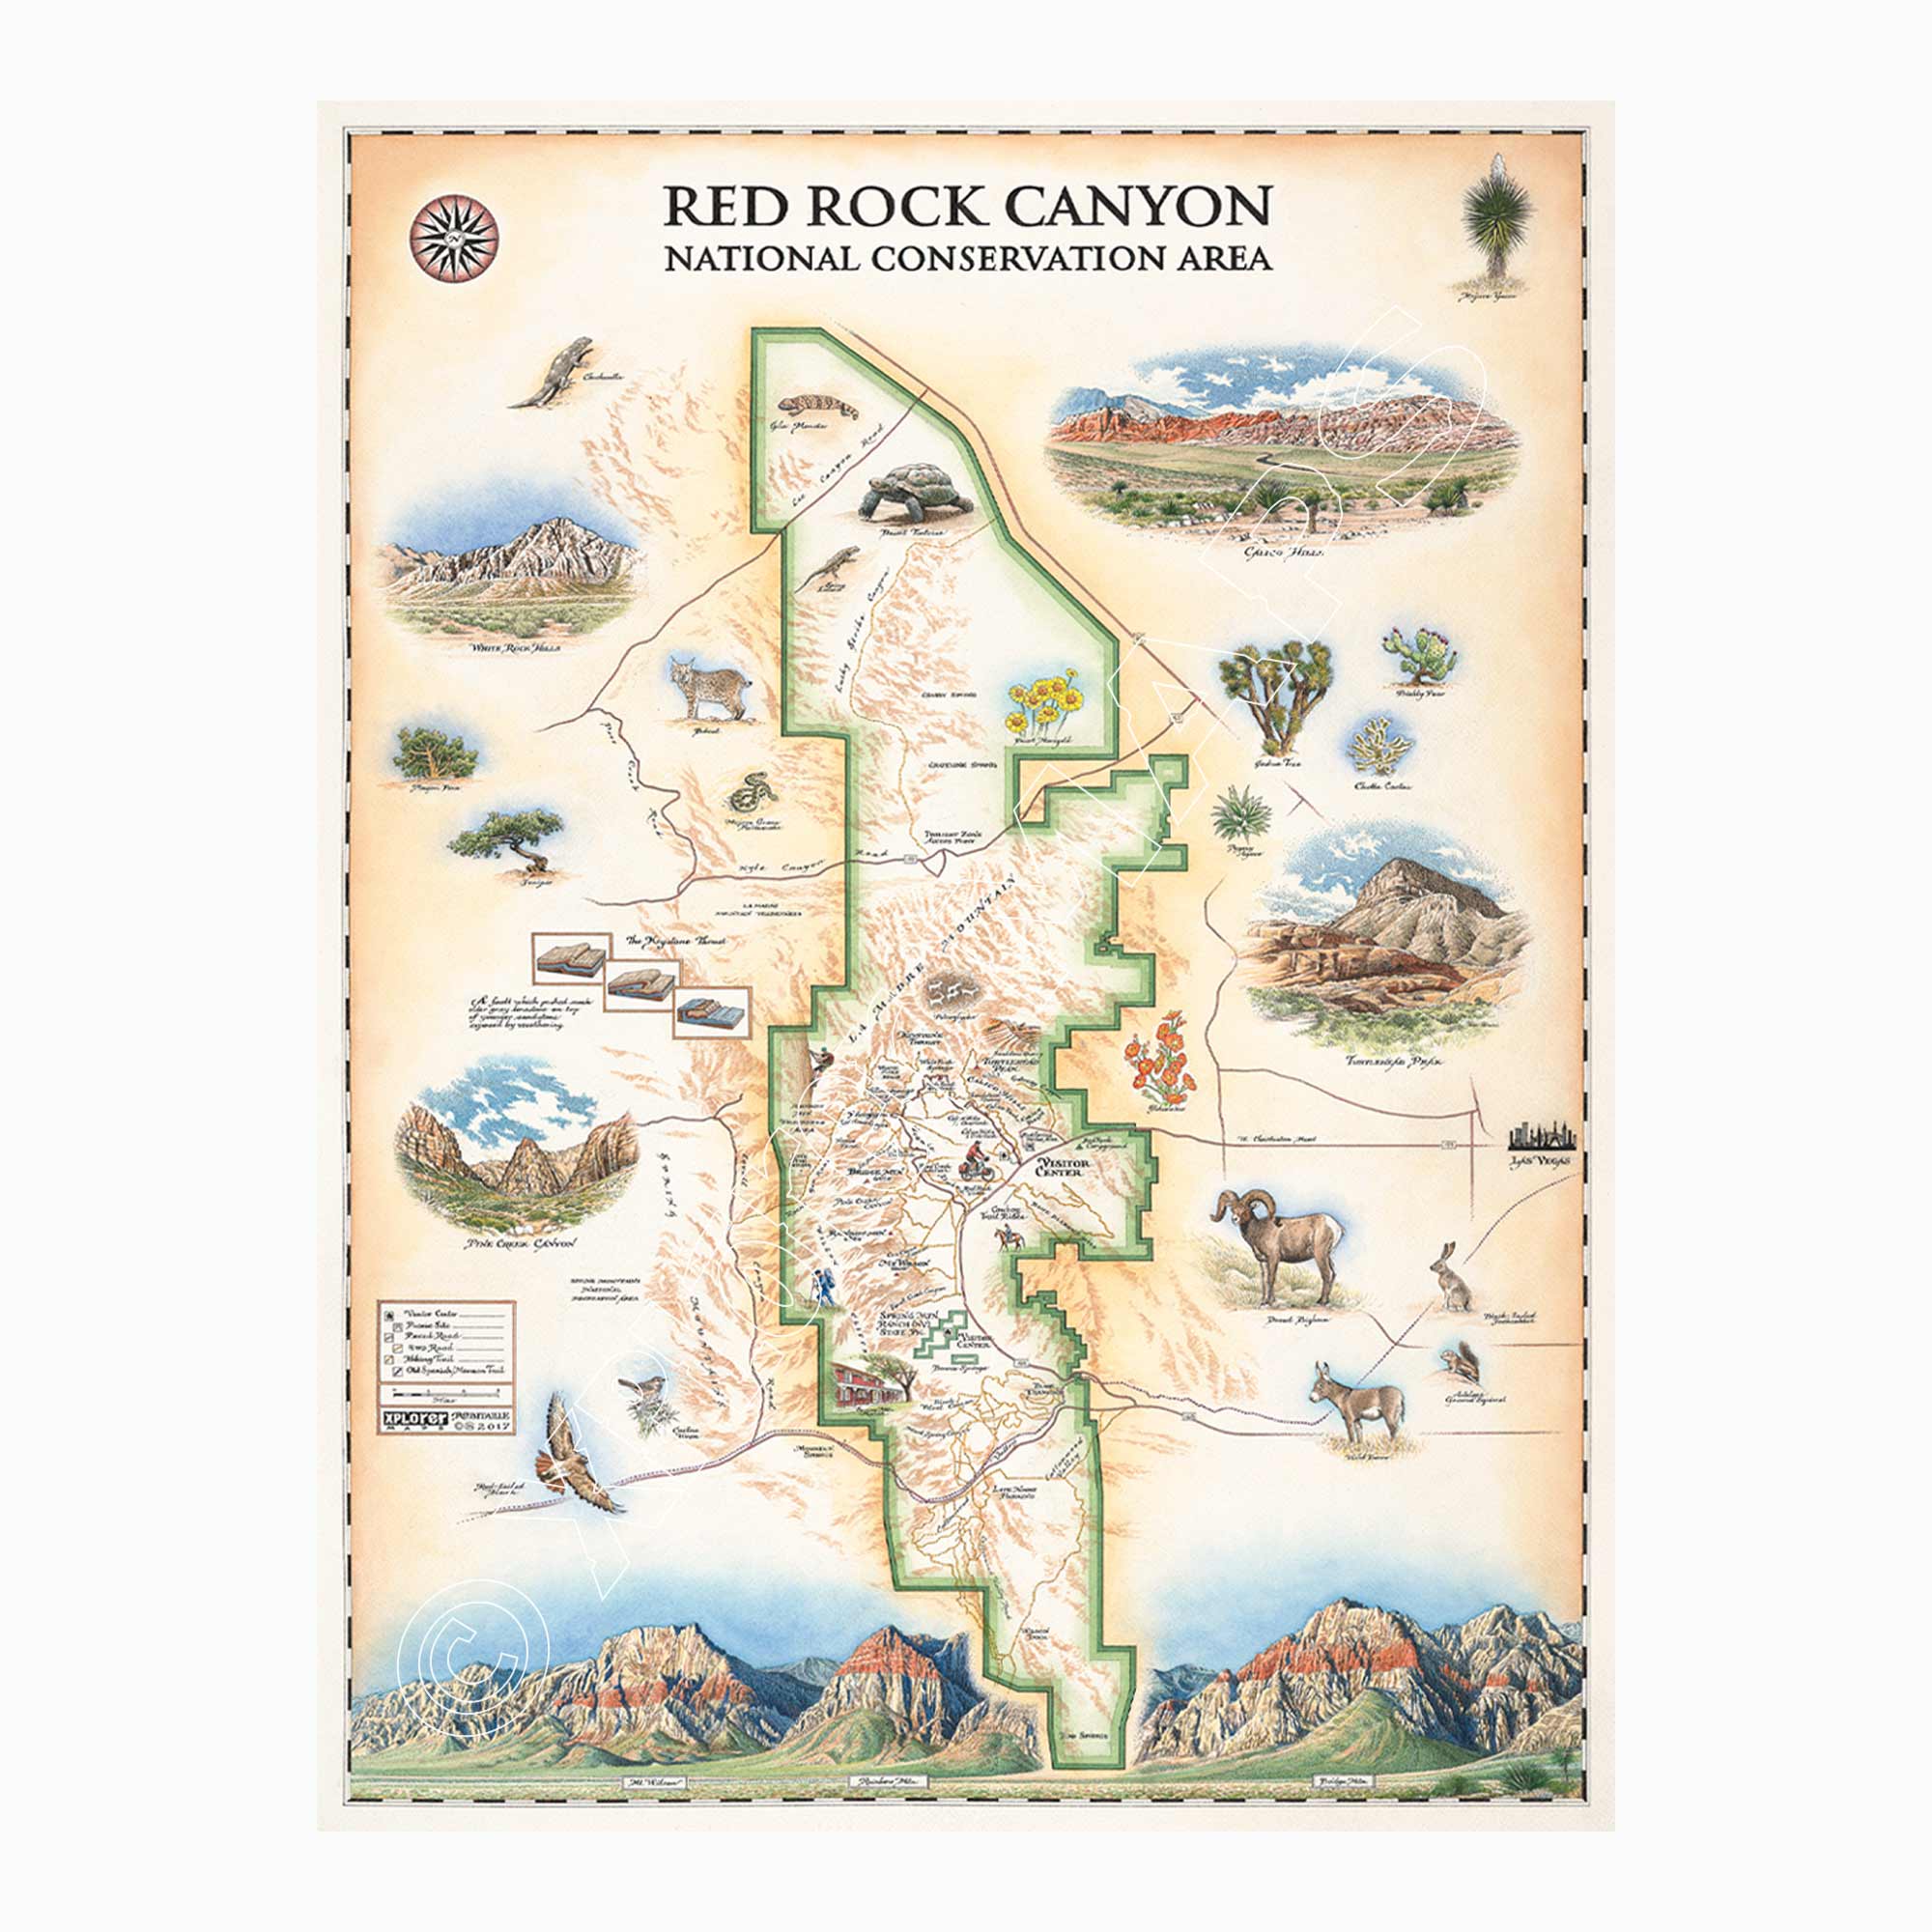 Red Rock Canyon National Recreation Area hand-drawn map in earth tones, beige and green. The map features illustrations of places such as Mt. Willson, Rainbow Mountain, Bridge Mountain, and Spring Mountain Ranch. Flora and fauna include a red tail hawk, desert Bighorn, Globemallow, Joshua tree, and Prickly pear cactus. Measures 18x24.